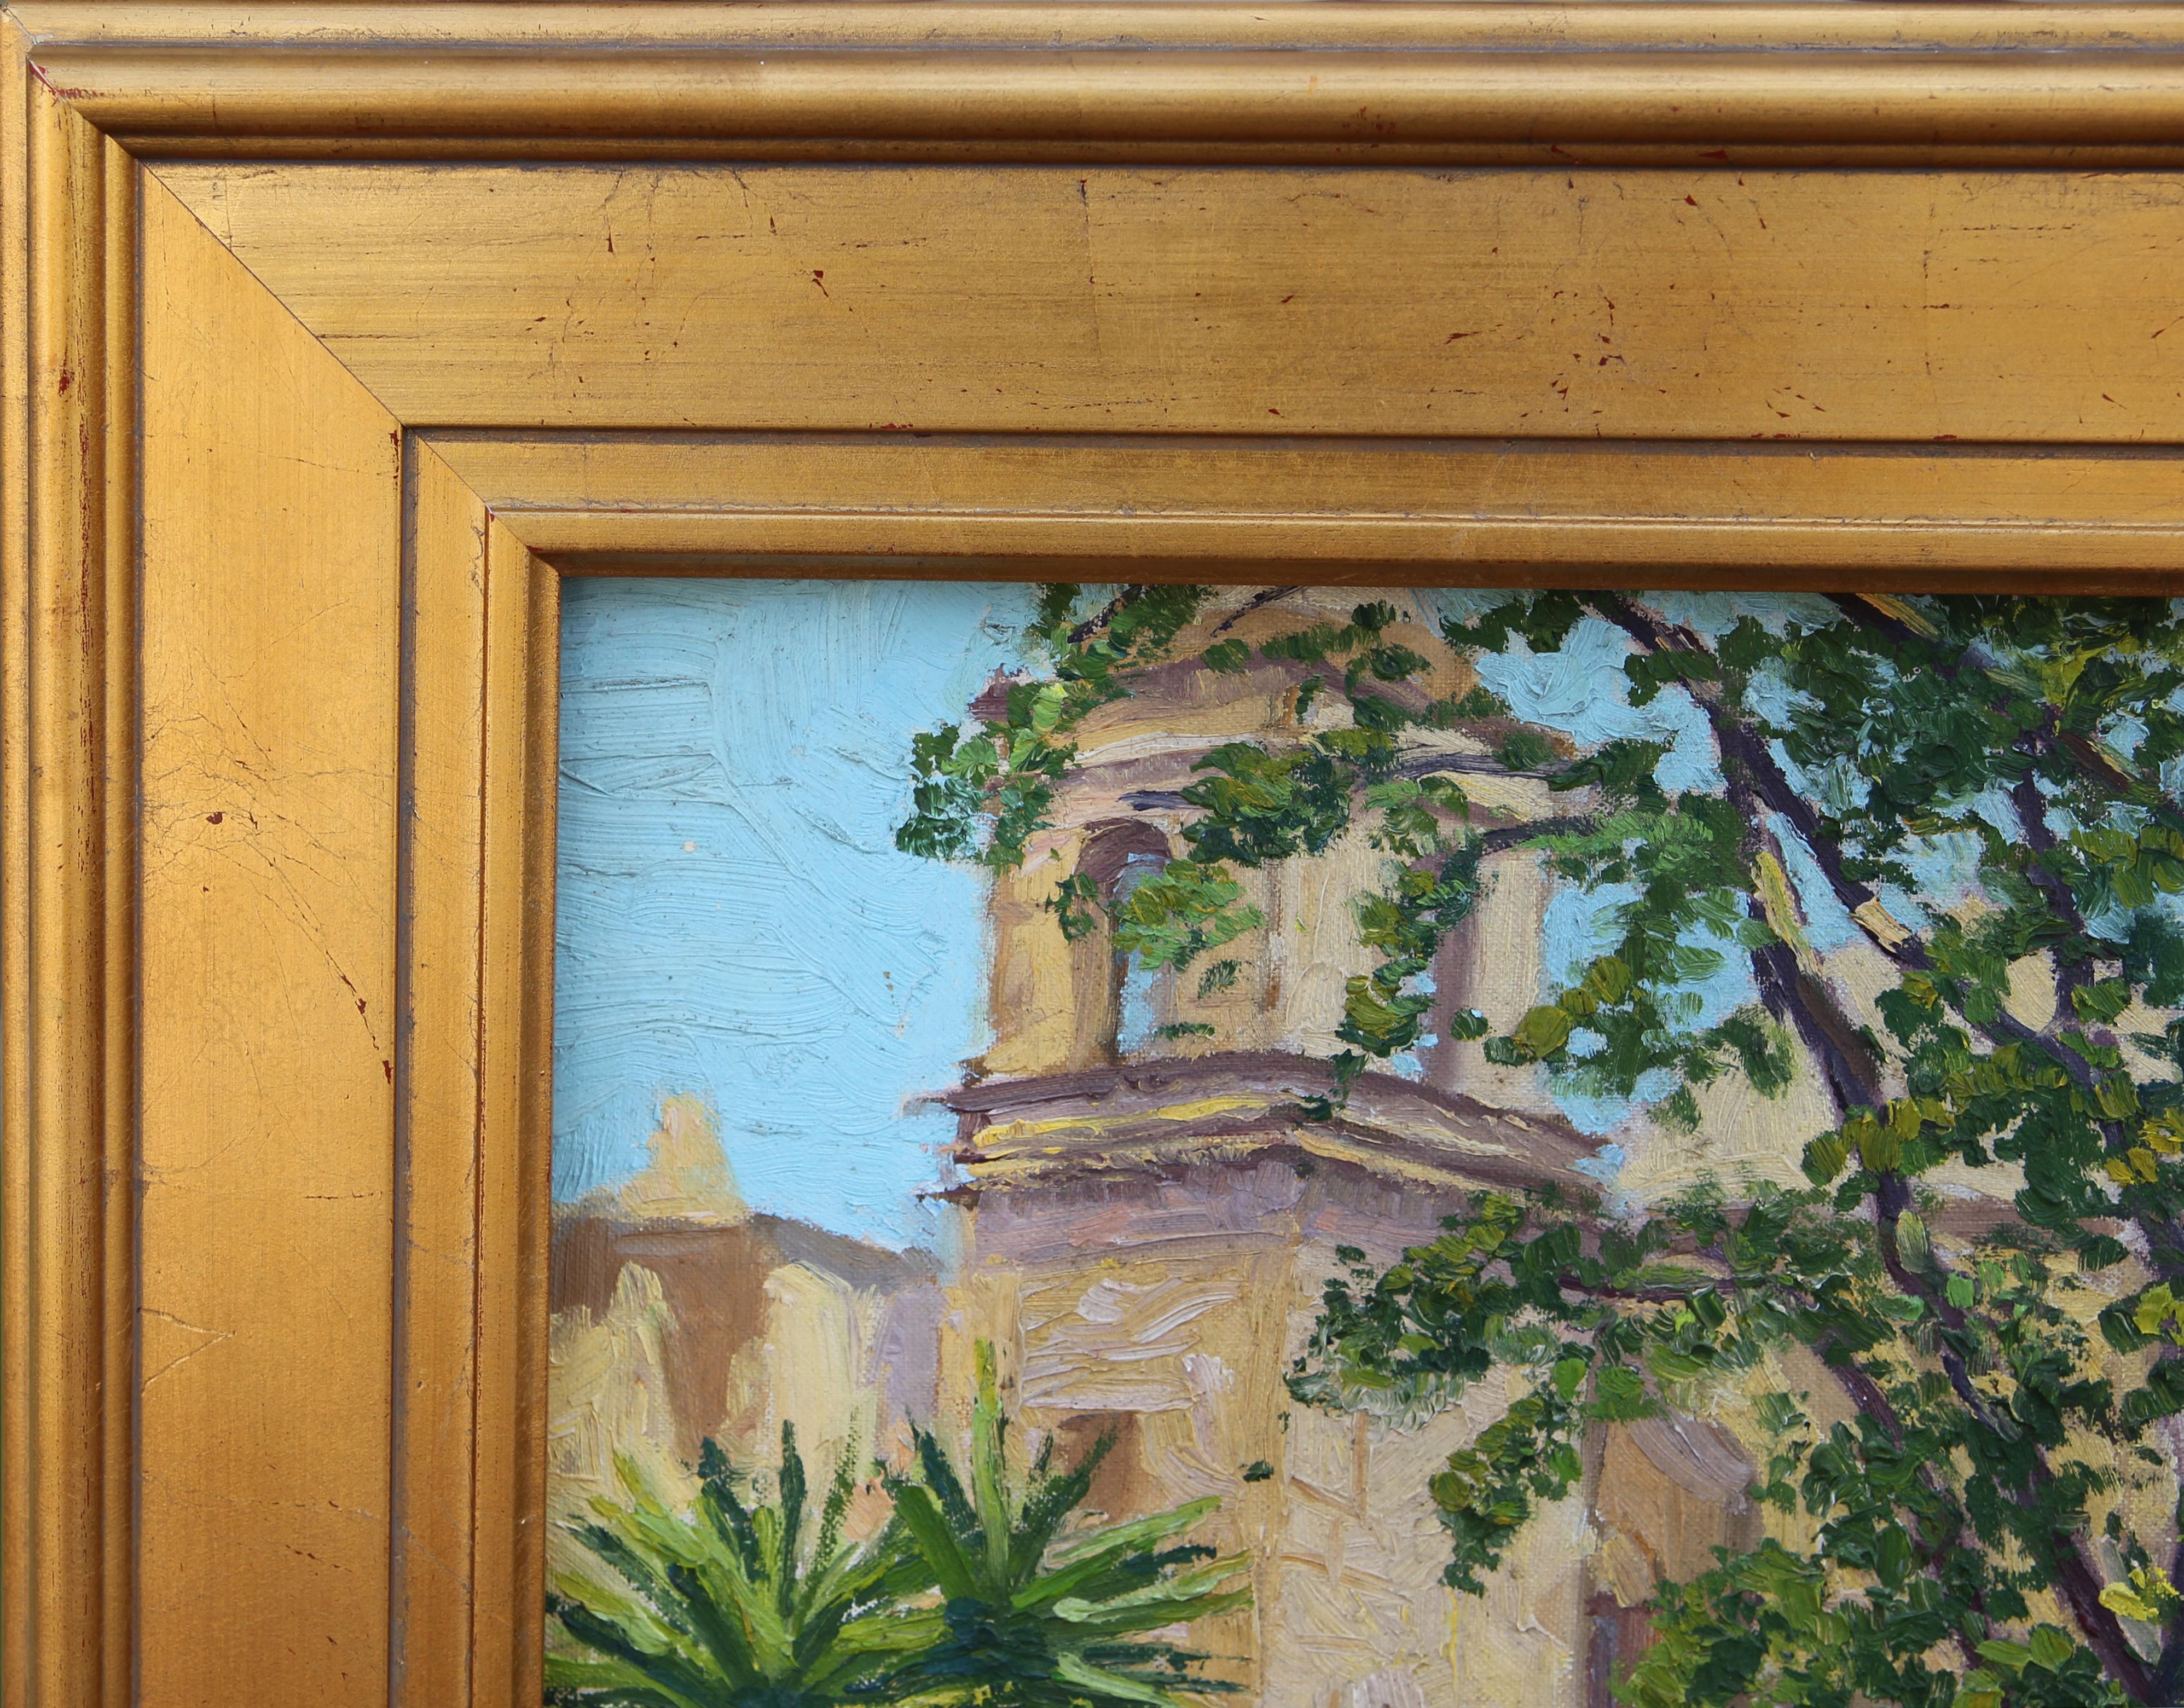 Serene naturalistic painting of an adobe style church building tucked behind a variety of tropical plants and trees with a small path. Believed to be a Texas scene, possibly of the Alamo. Painted in a style similar to Texas artist Peter Hohnstedt.